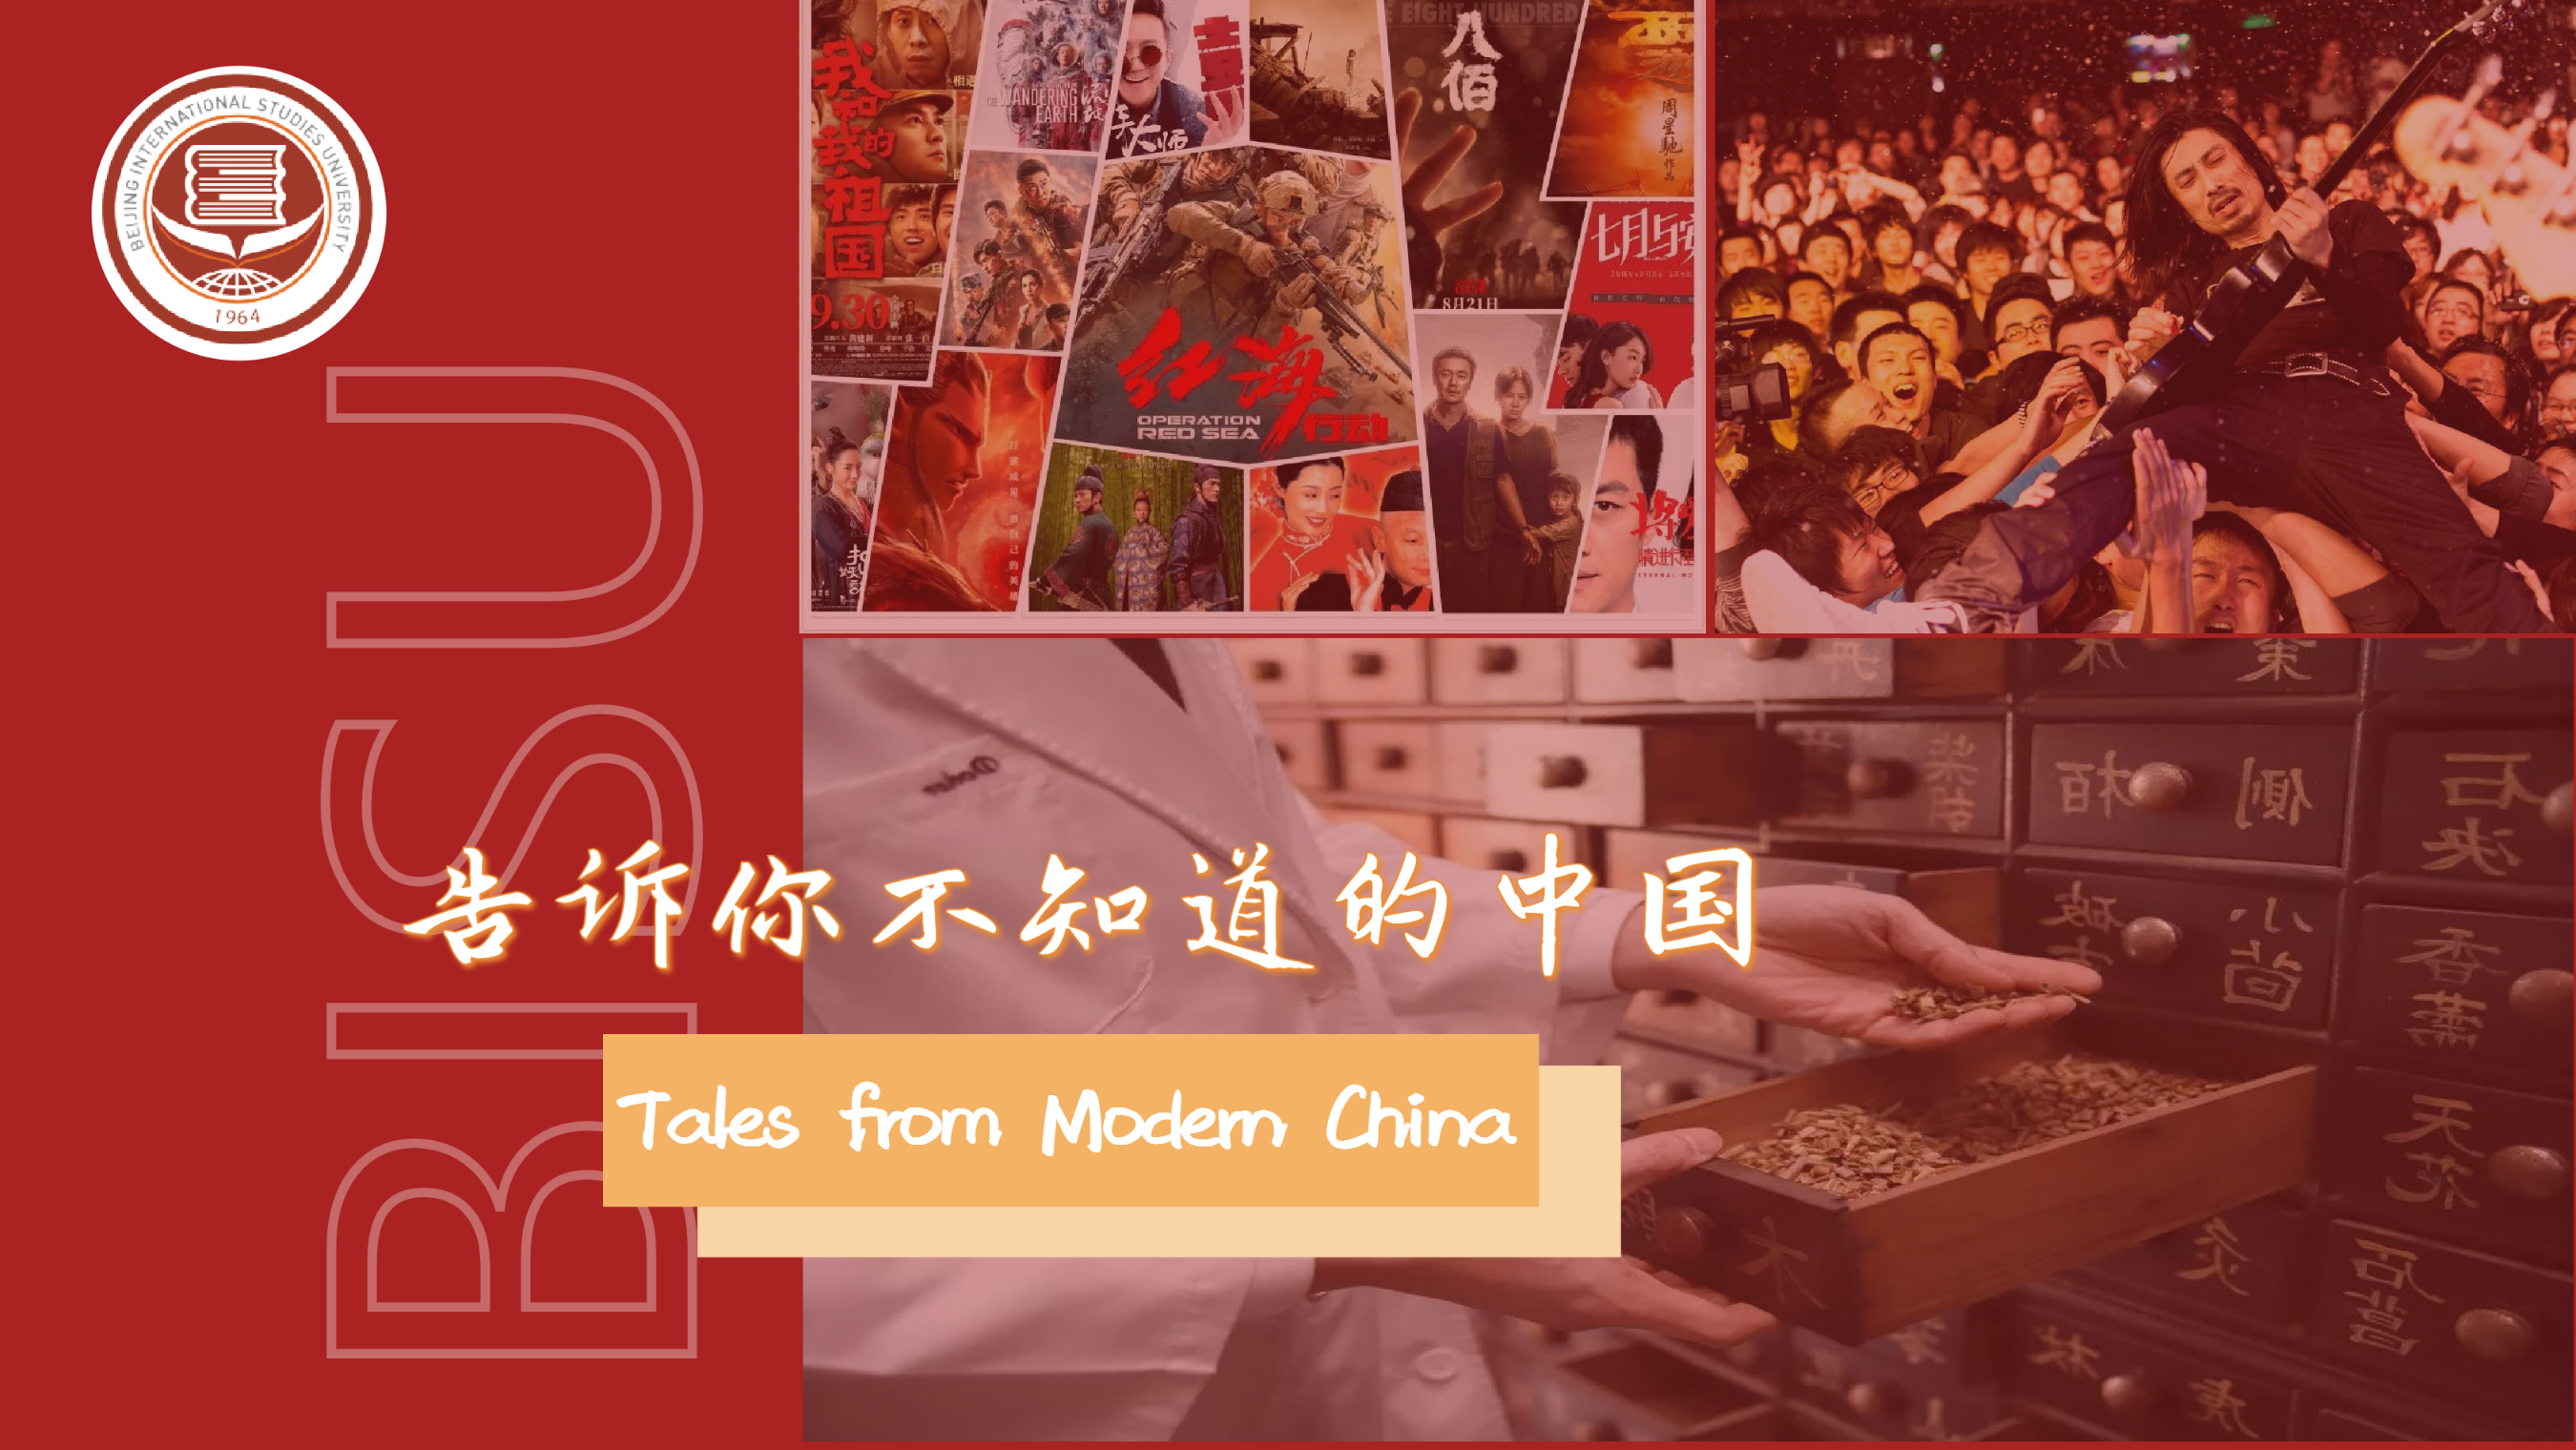 Tales from Modern China